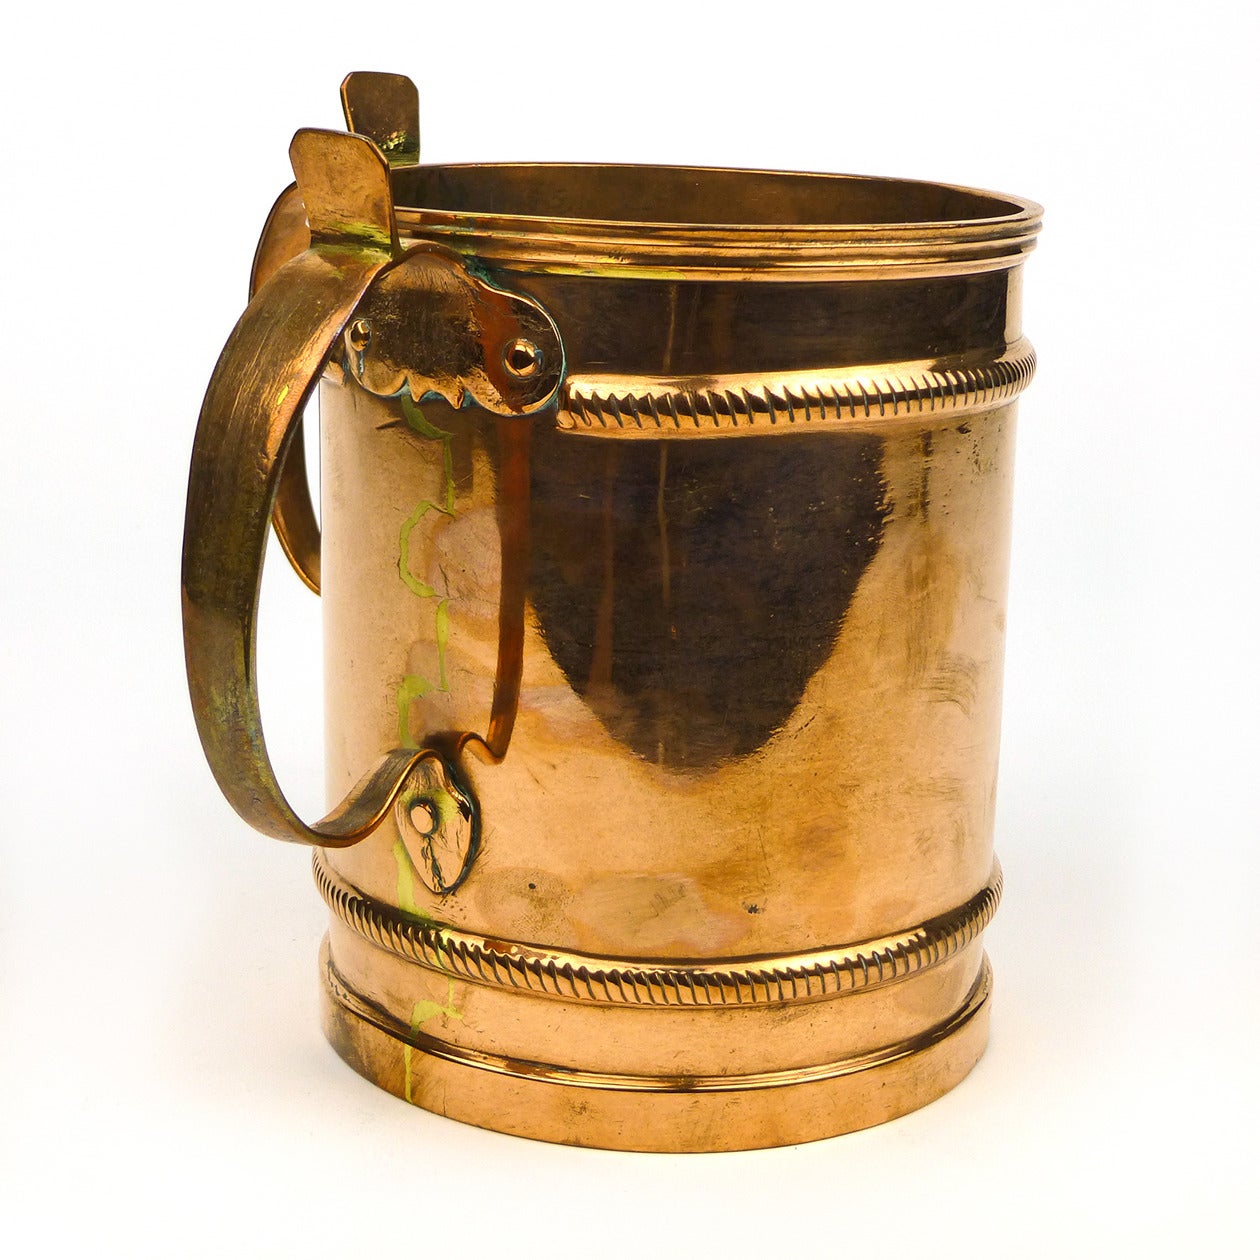 Very finely made Russian two-handled copper wash cup, circa 1850.

Judaic. Used for the ceremonial washing of hands (netilat yadayim). Unusual features include thumb piece and scalloped detail.

Measures: Height 6 3/16?, Diameter 5?.